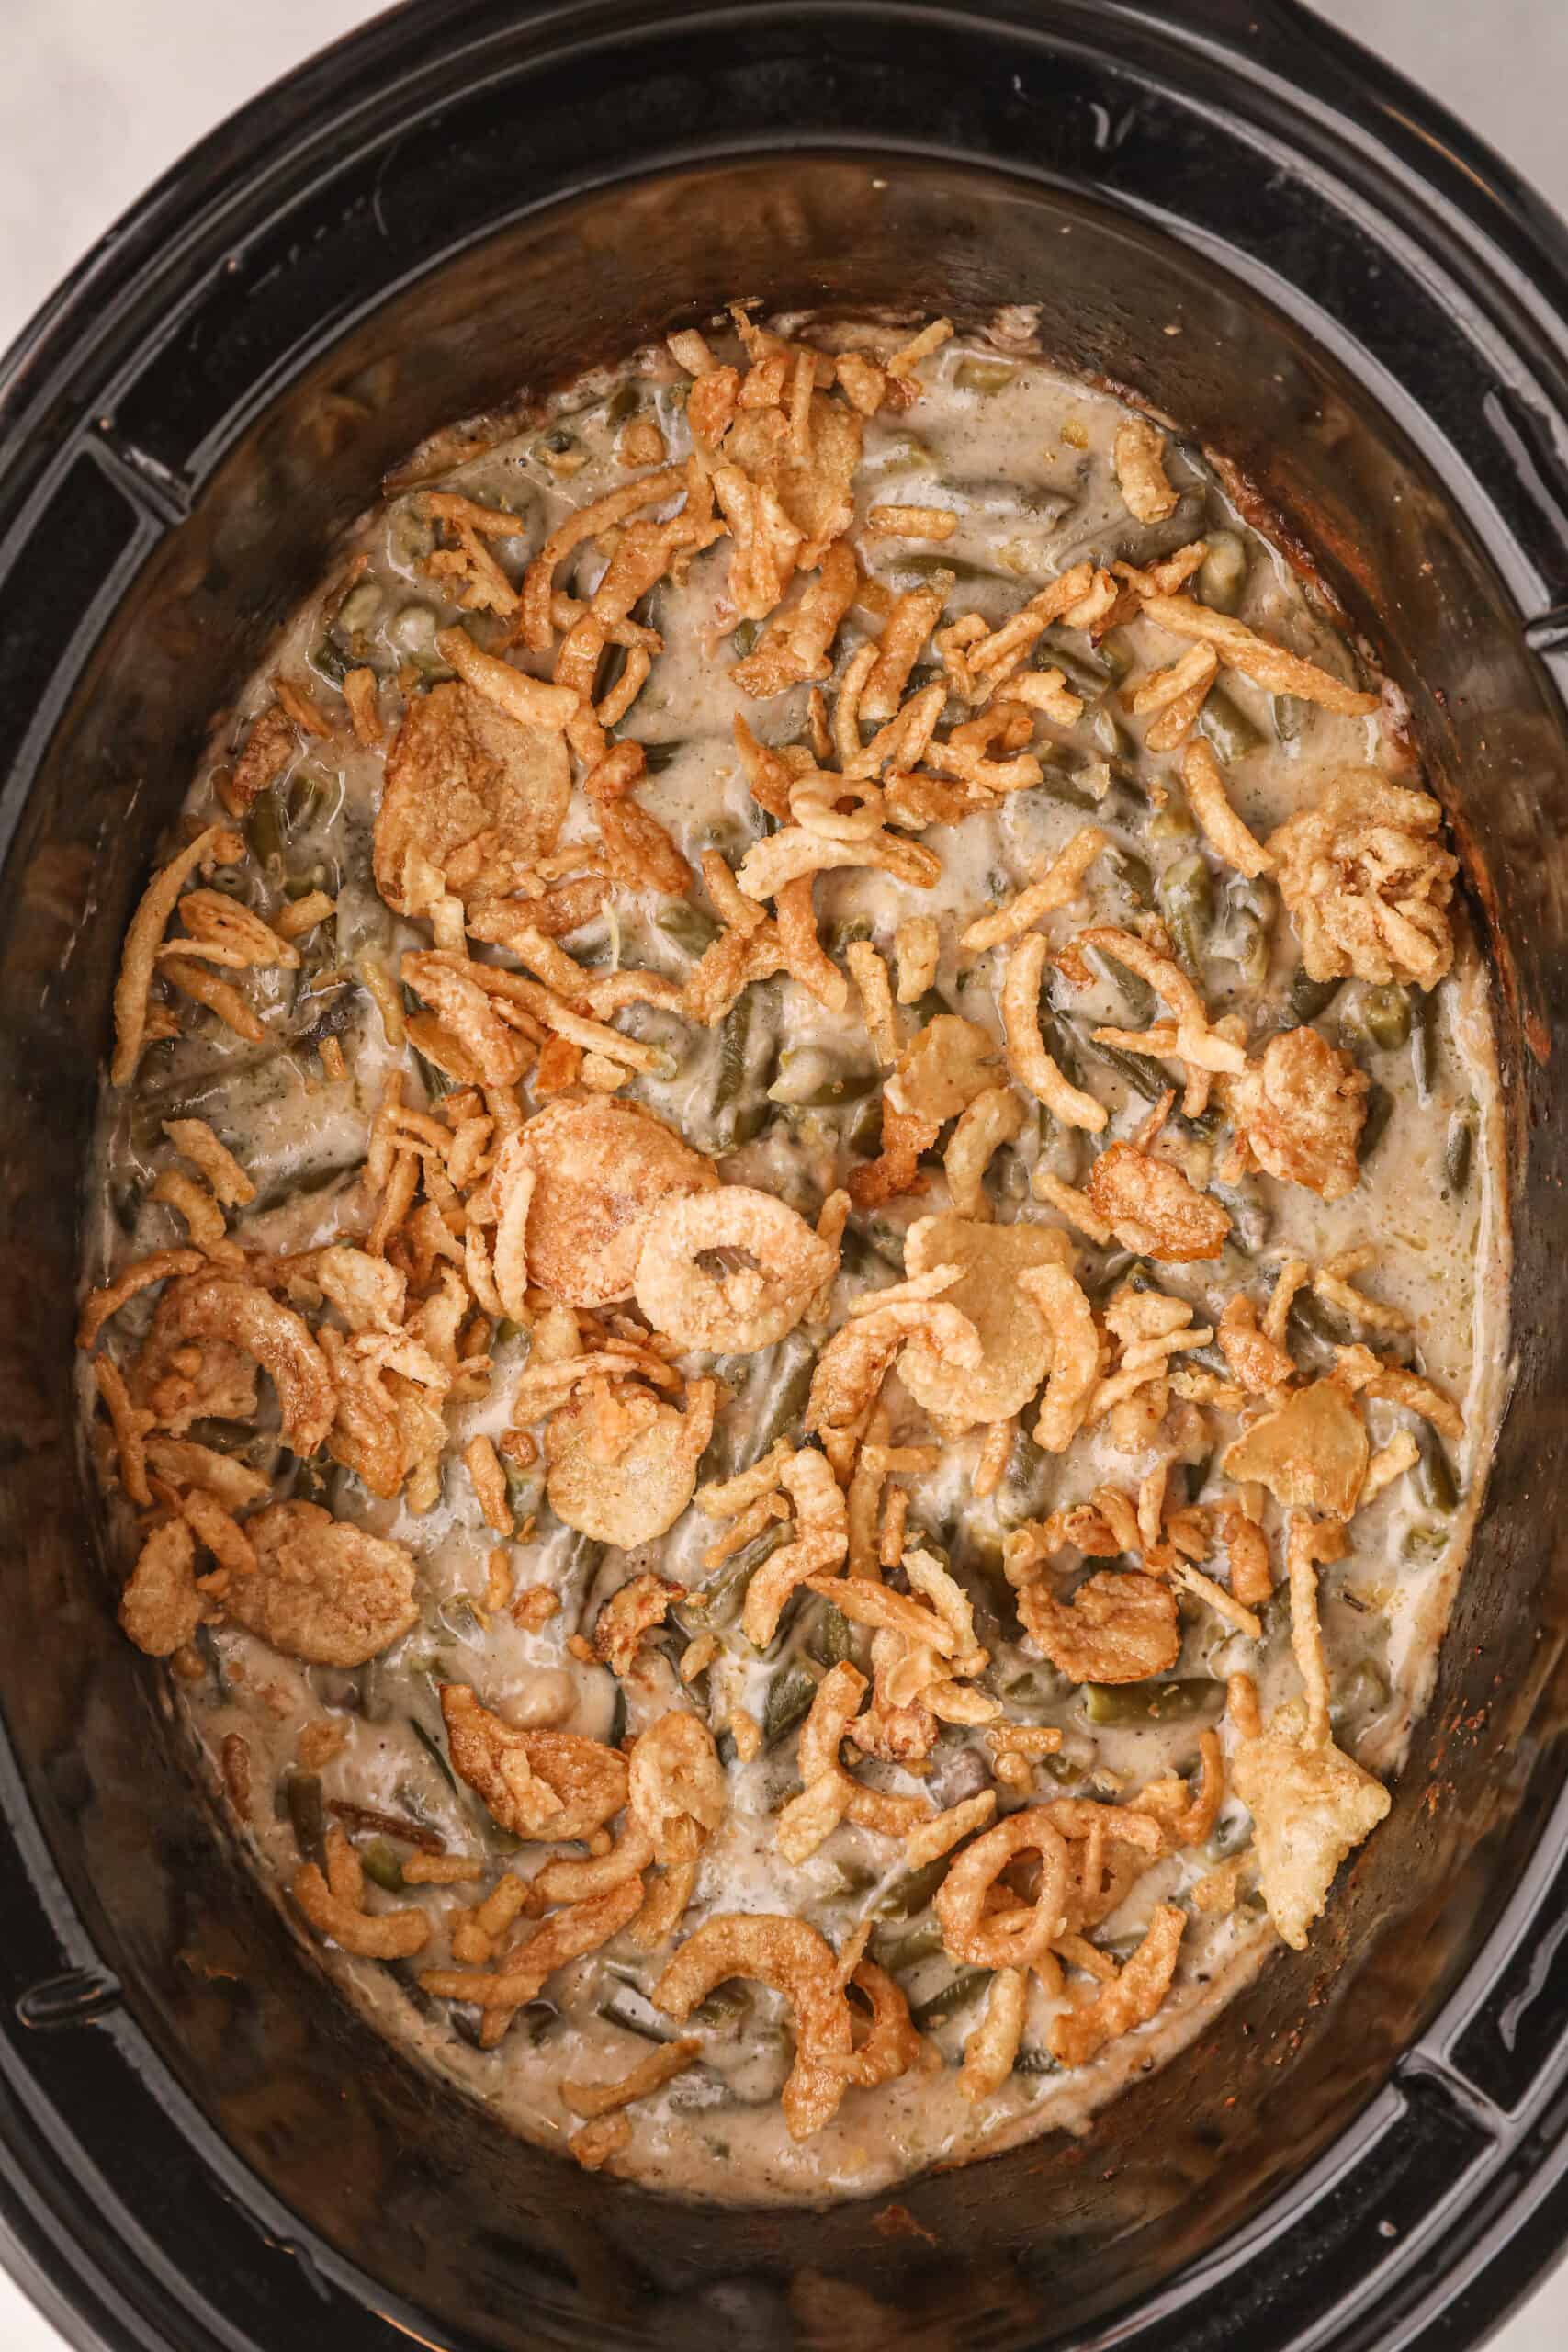 Green bean casserole cooked in crockpot and topped with french's crispy fried onions.